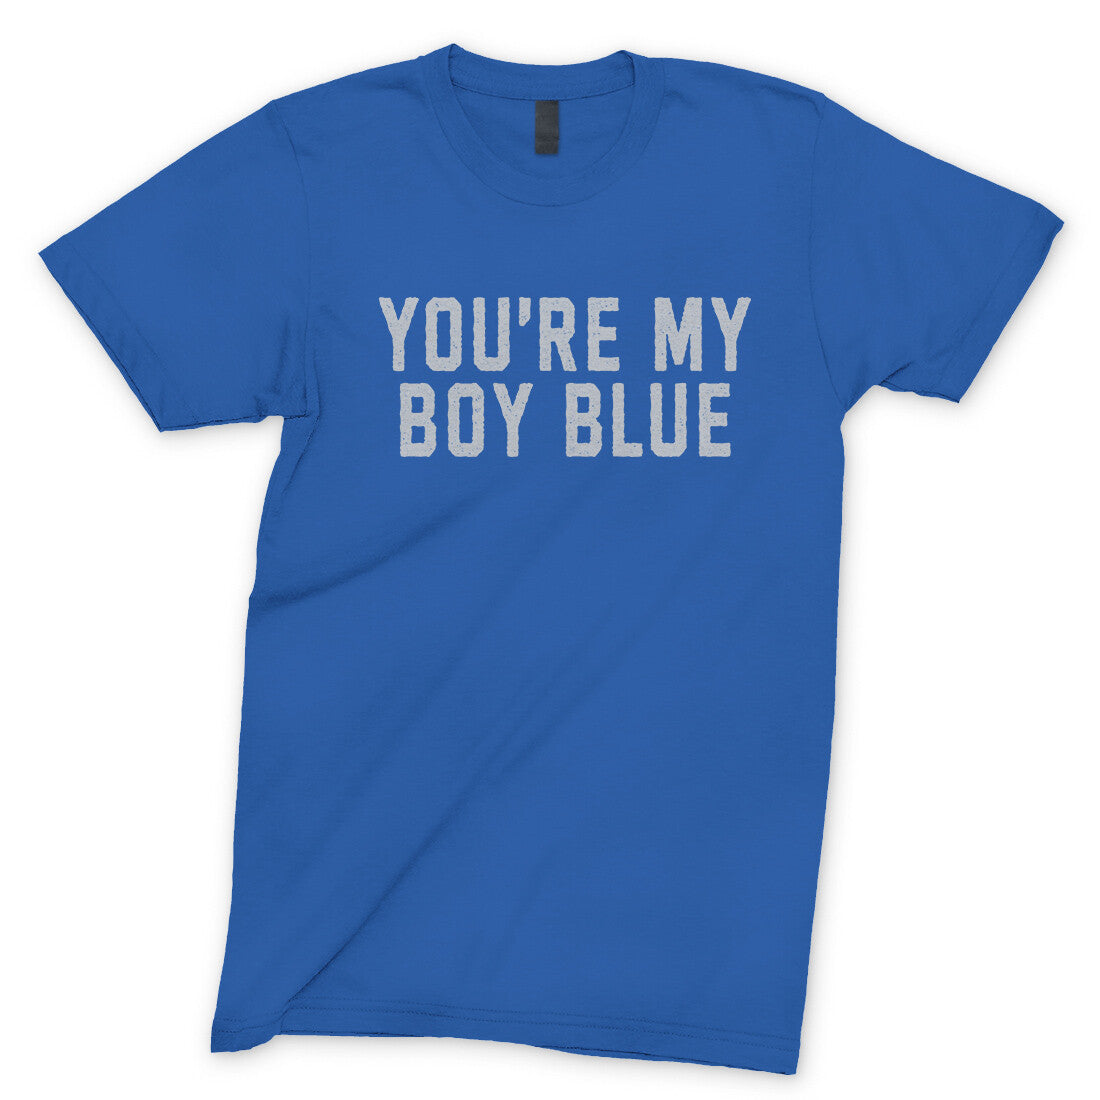 You're my Boy Blue in Royal Color